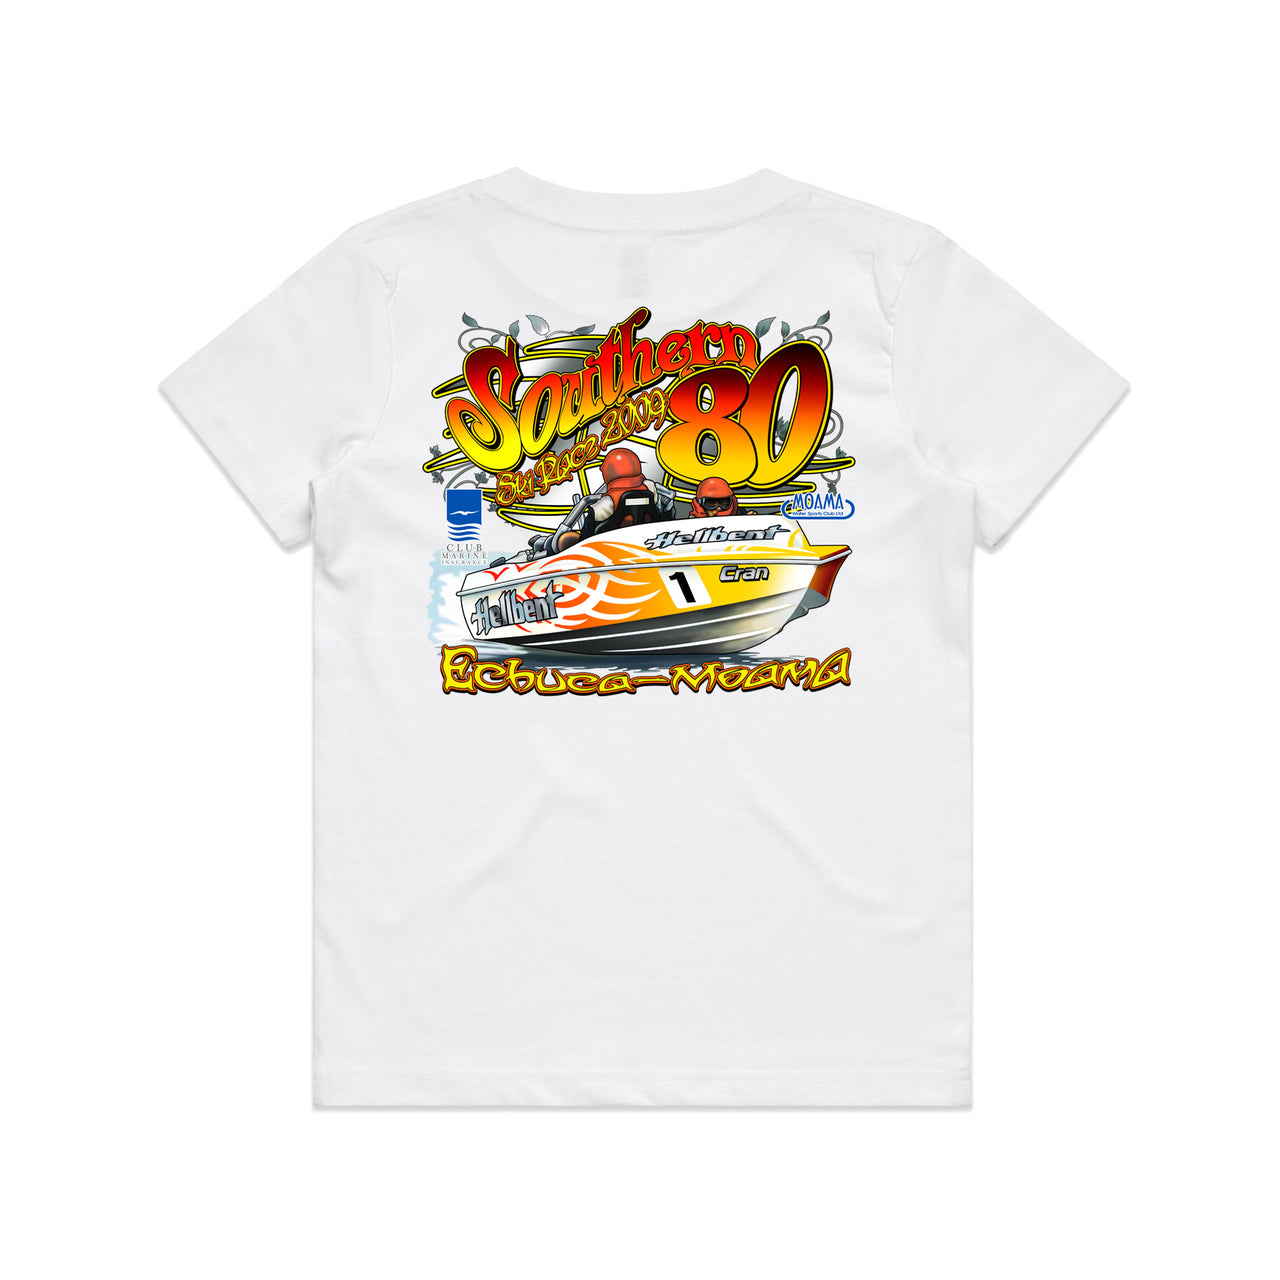 S80 2009 Hellbent Event Youth/Kids Tee